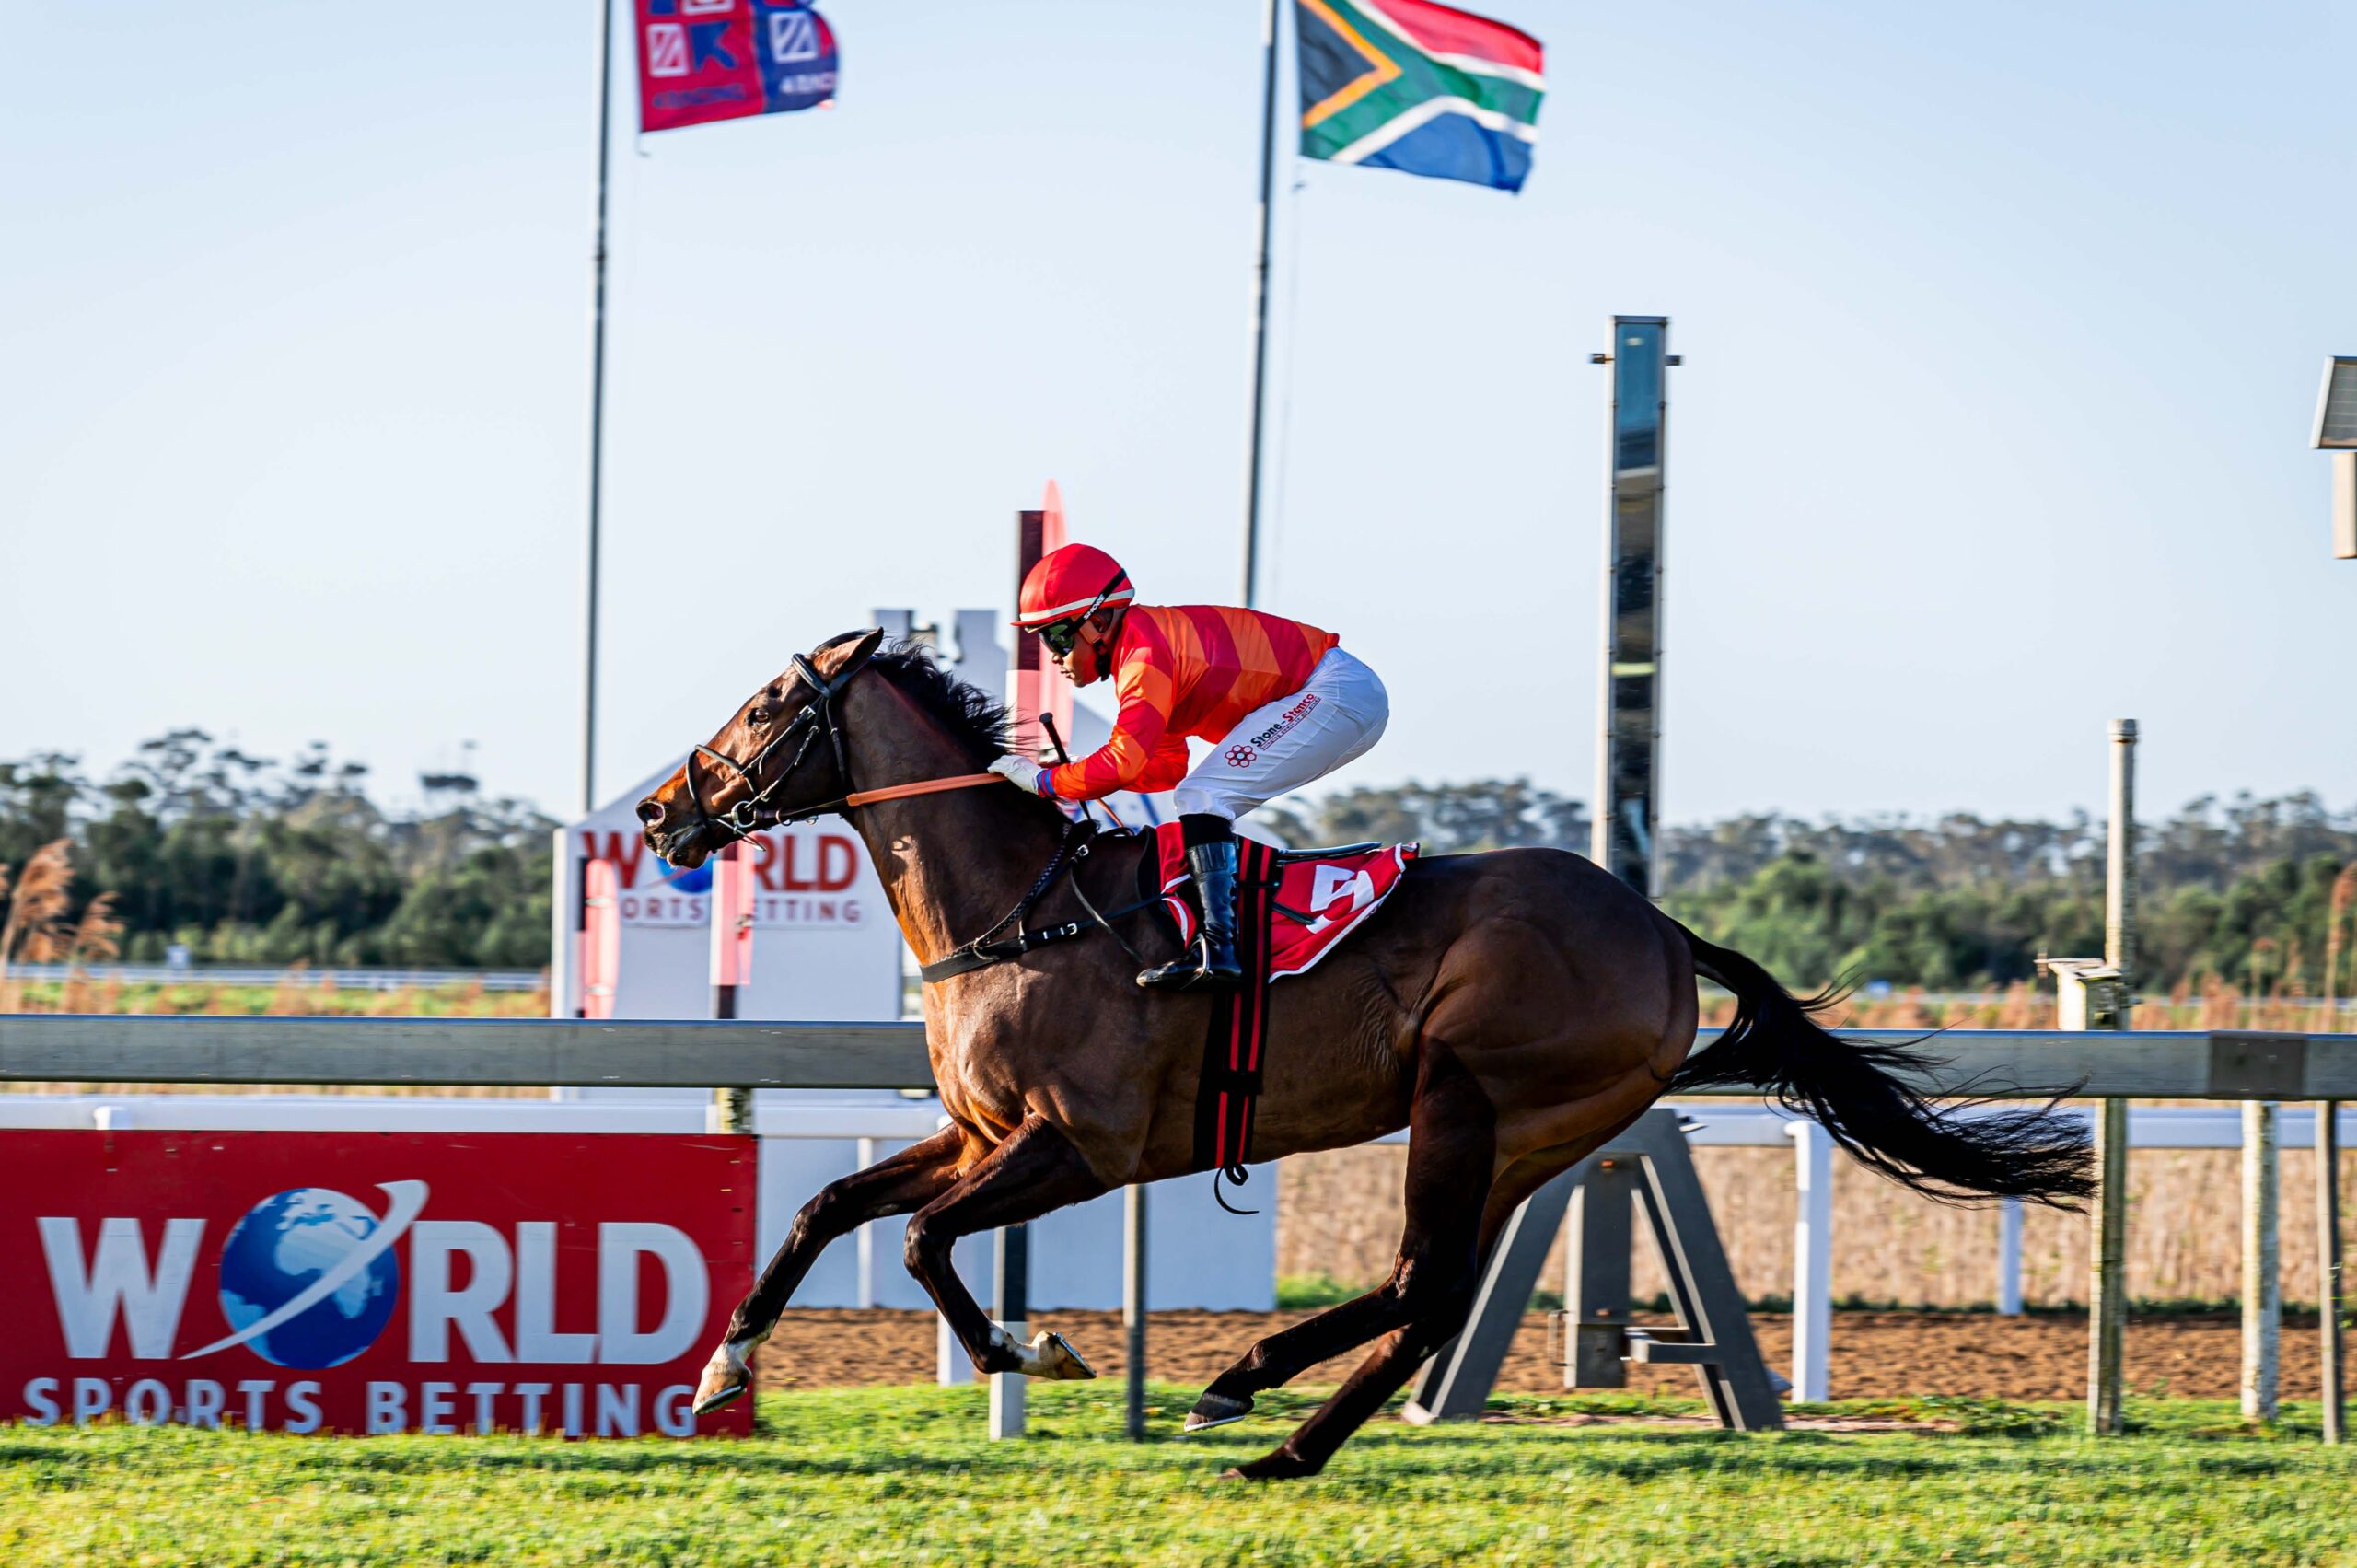 LAST RACE AND YES ITS A KZN BRED WINNER: GIMME MORE TIME